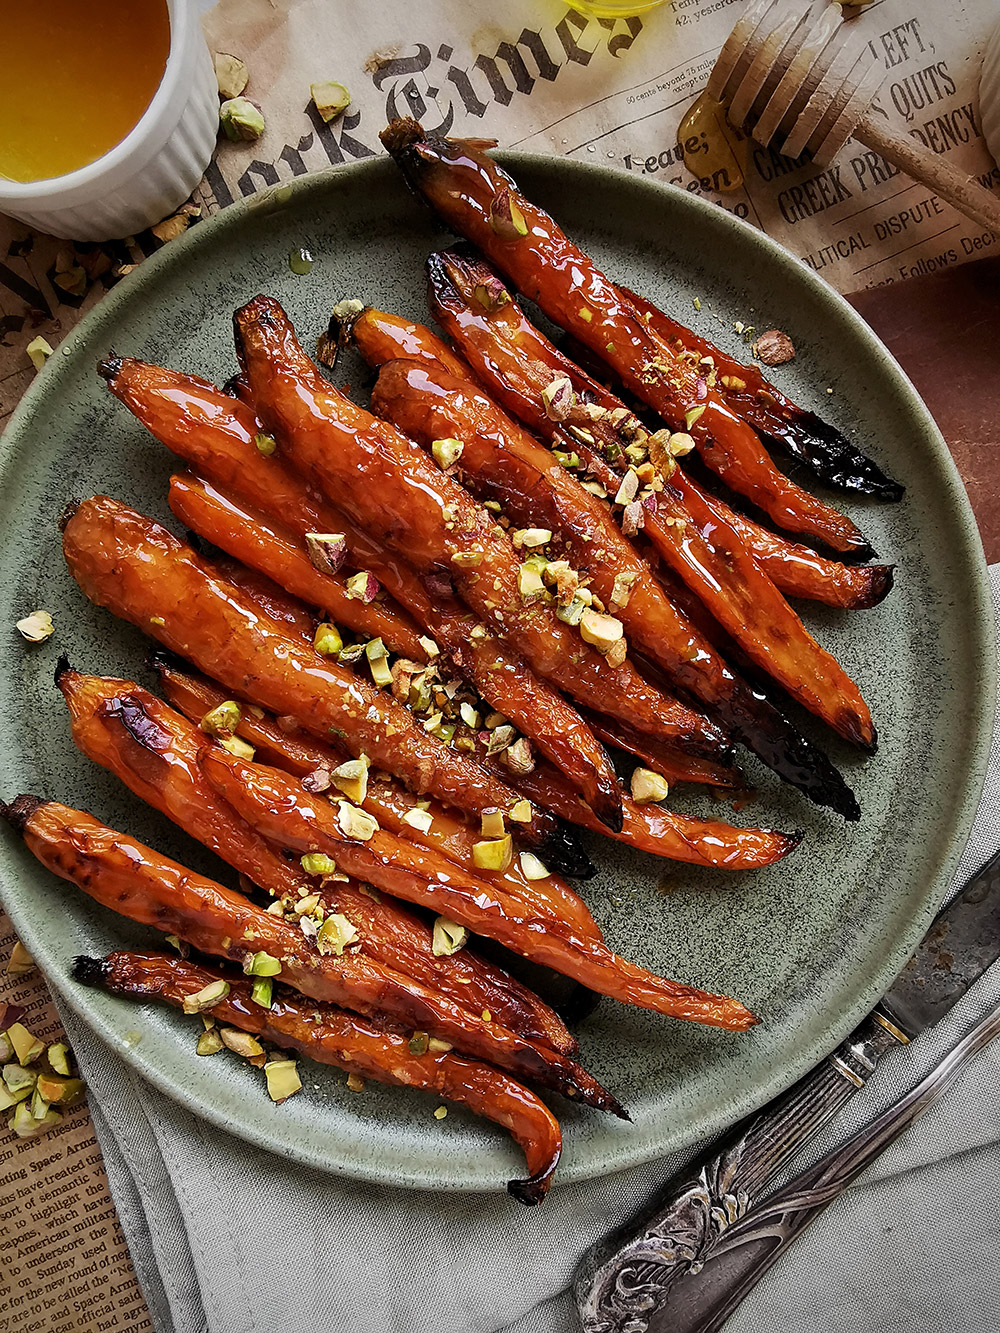 Buttered roasted carrots with pistachio